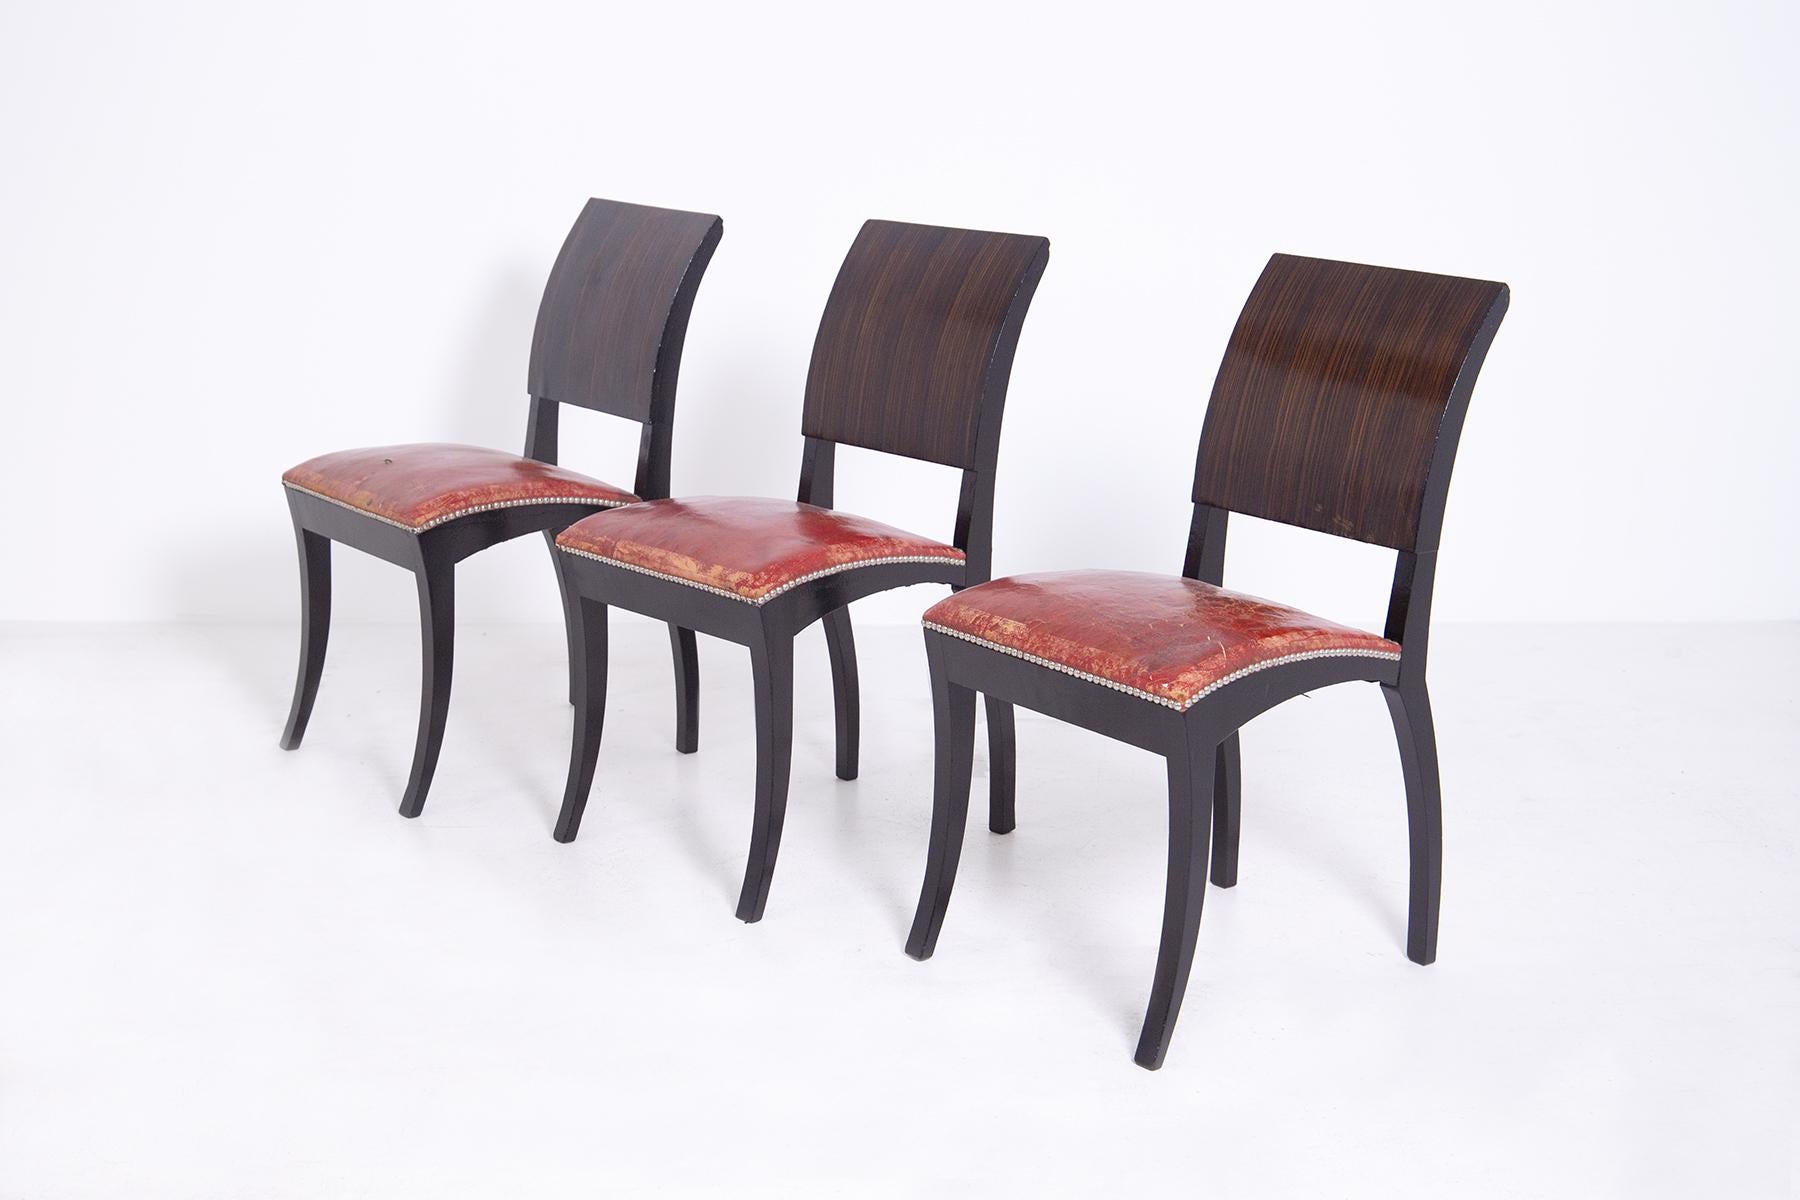 Wonderful set composed of six French chairs Art Deco from the 1920s-1930s.
The structure of the French chairs was made of solid and fine wood, the seat is made of red leather and the sides were applied studs.
The characteristics of the elegant set